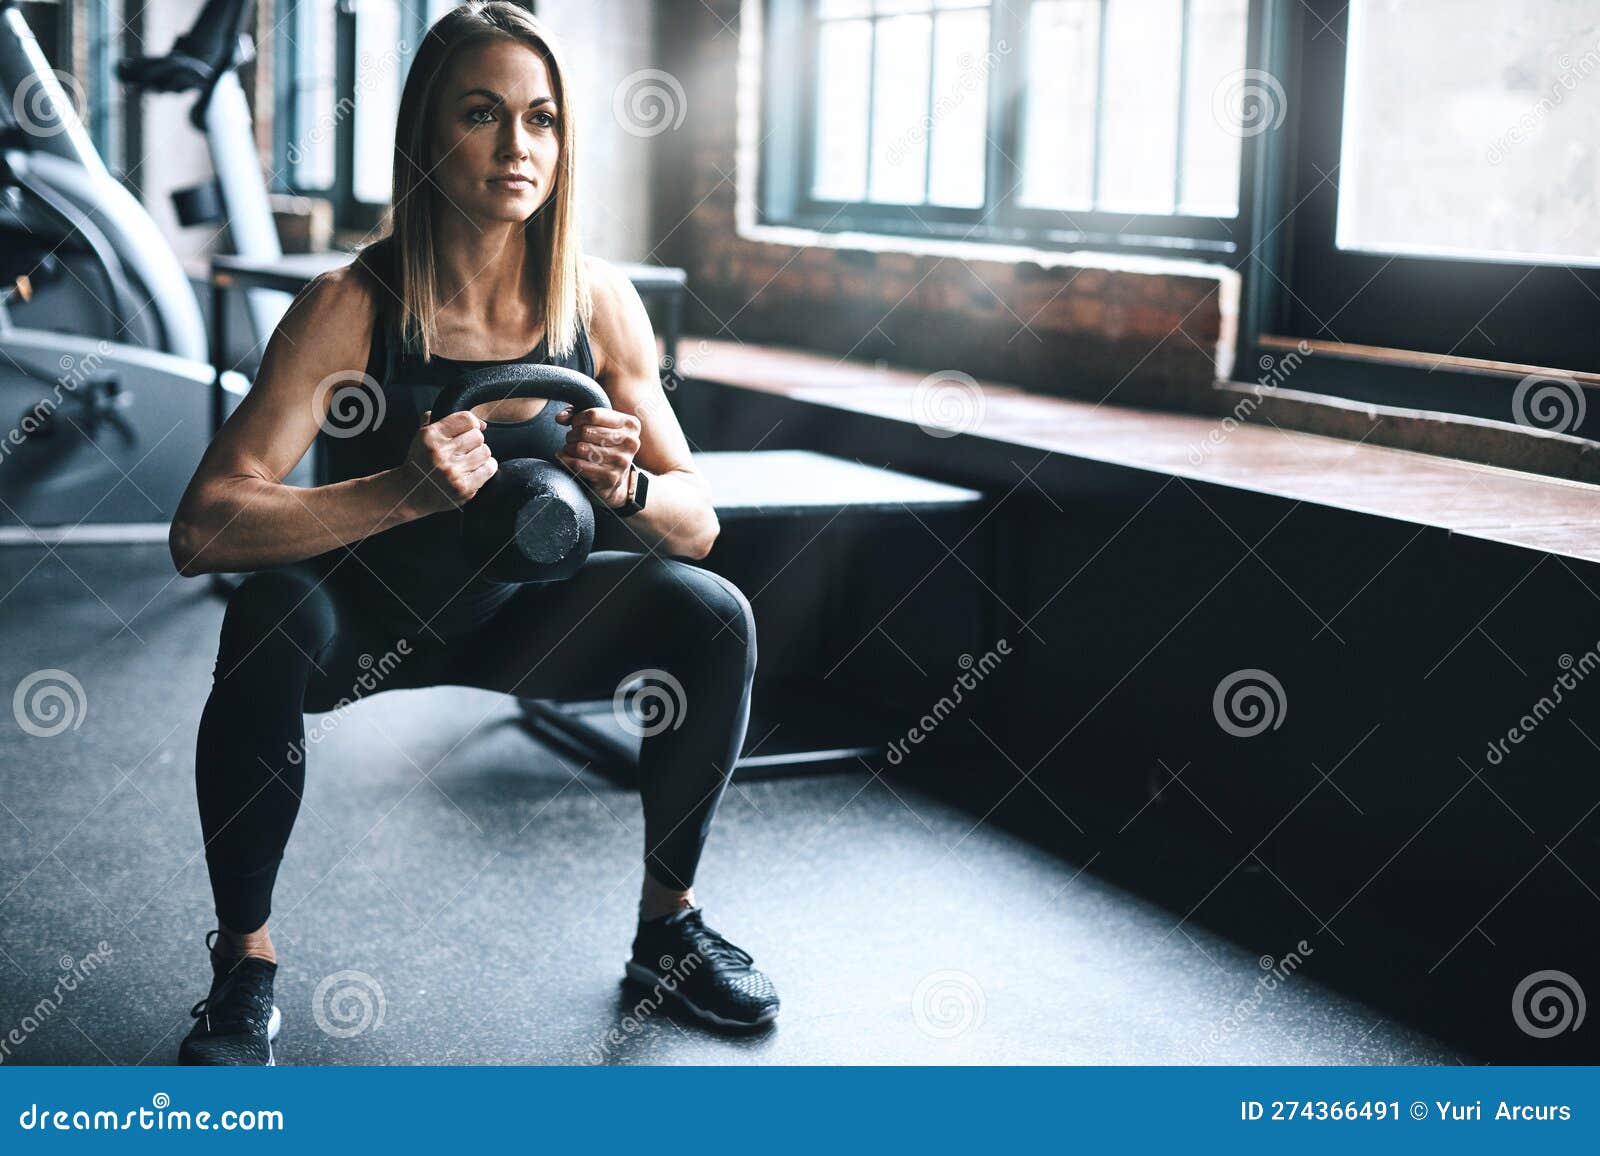 Drop it Down Low. a Young Woman Working Out with a Kettle Bell in a Gym ...